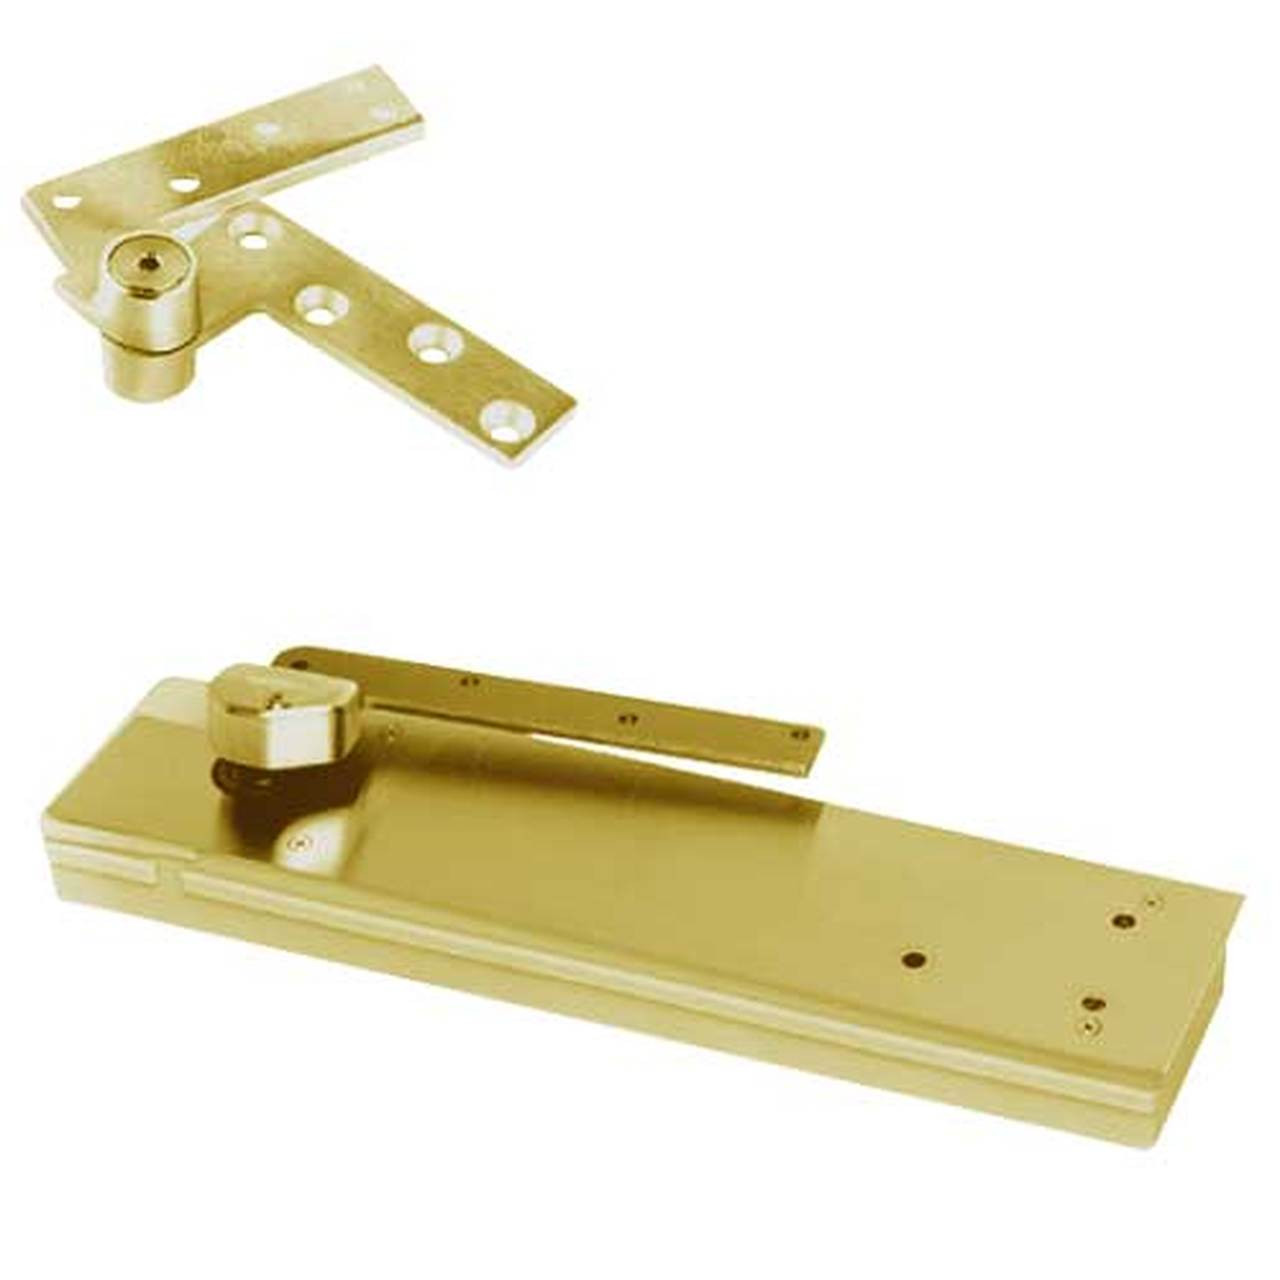 F5103NBC-SC-LH-606 Rixson 51 Series 3/4" Offset Hung Shallow Depth Floor Closers in Satin Brass Finish